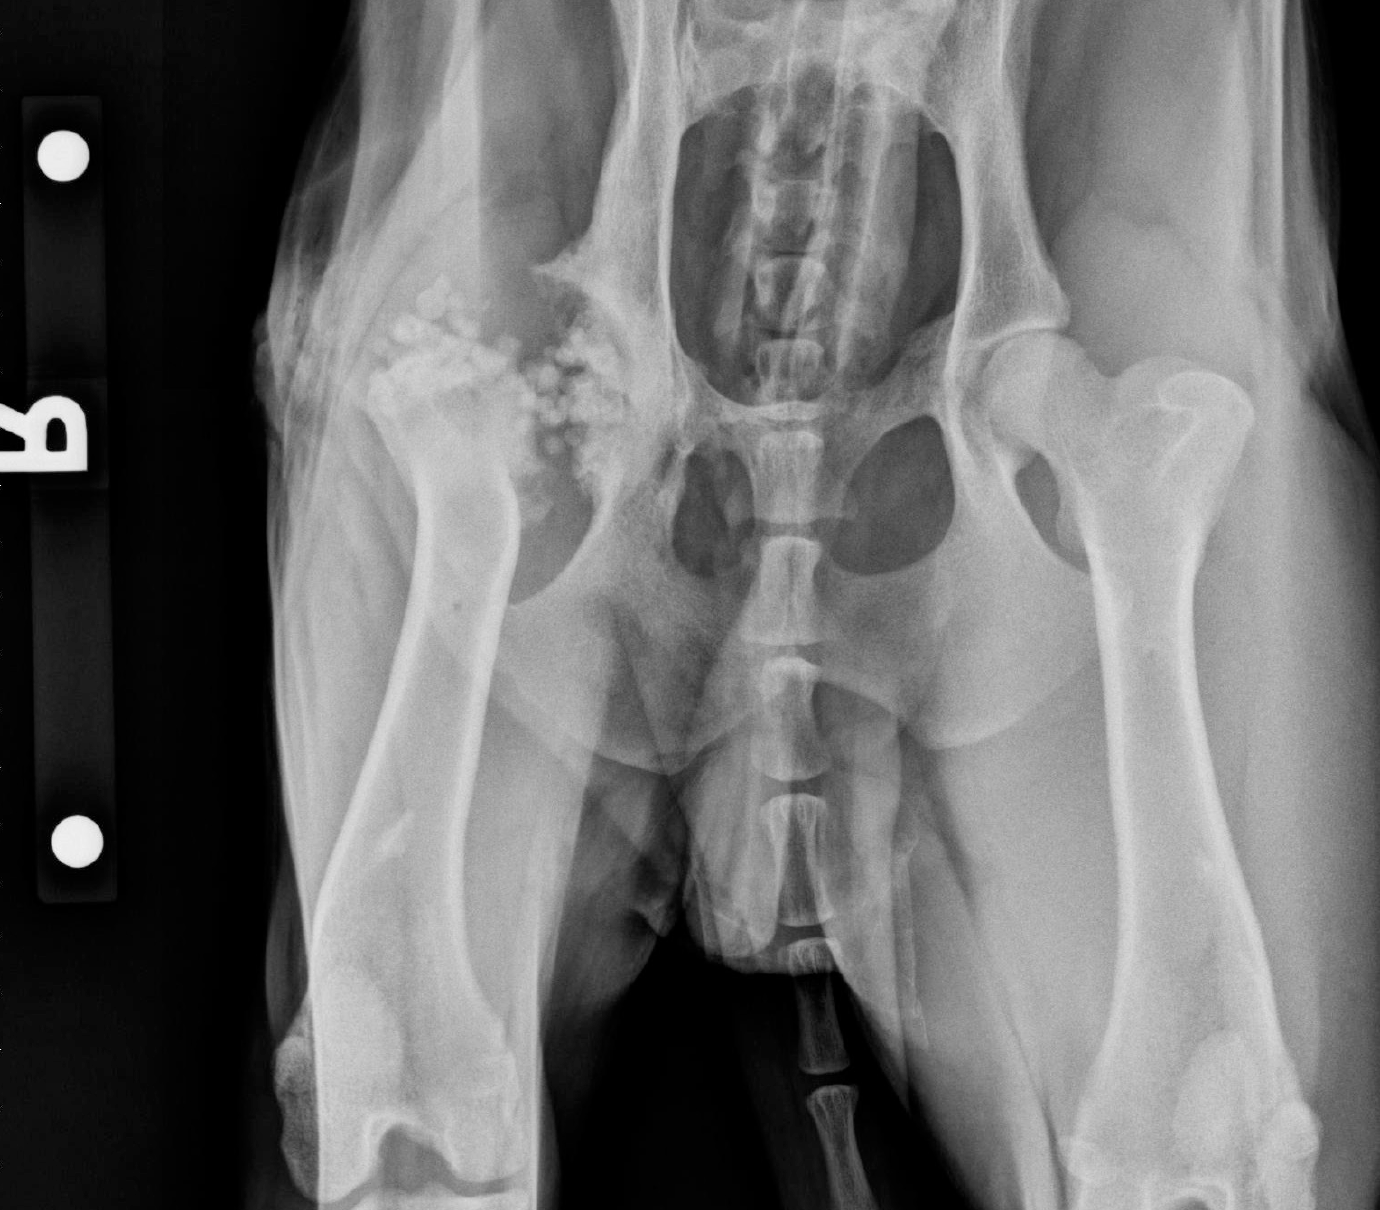 Dexter - Results of FHO and bone infection seen on a radiograph